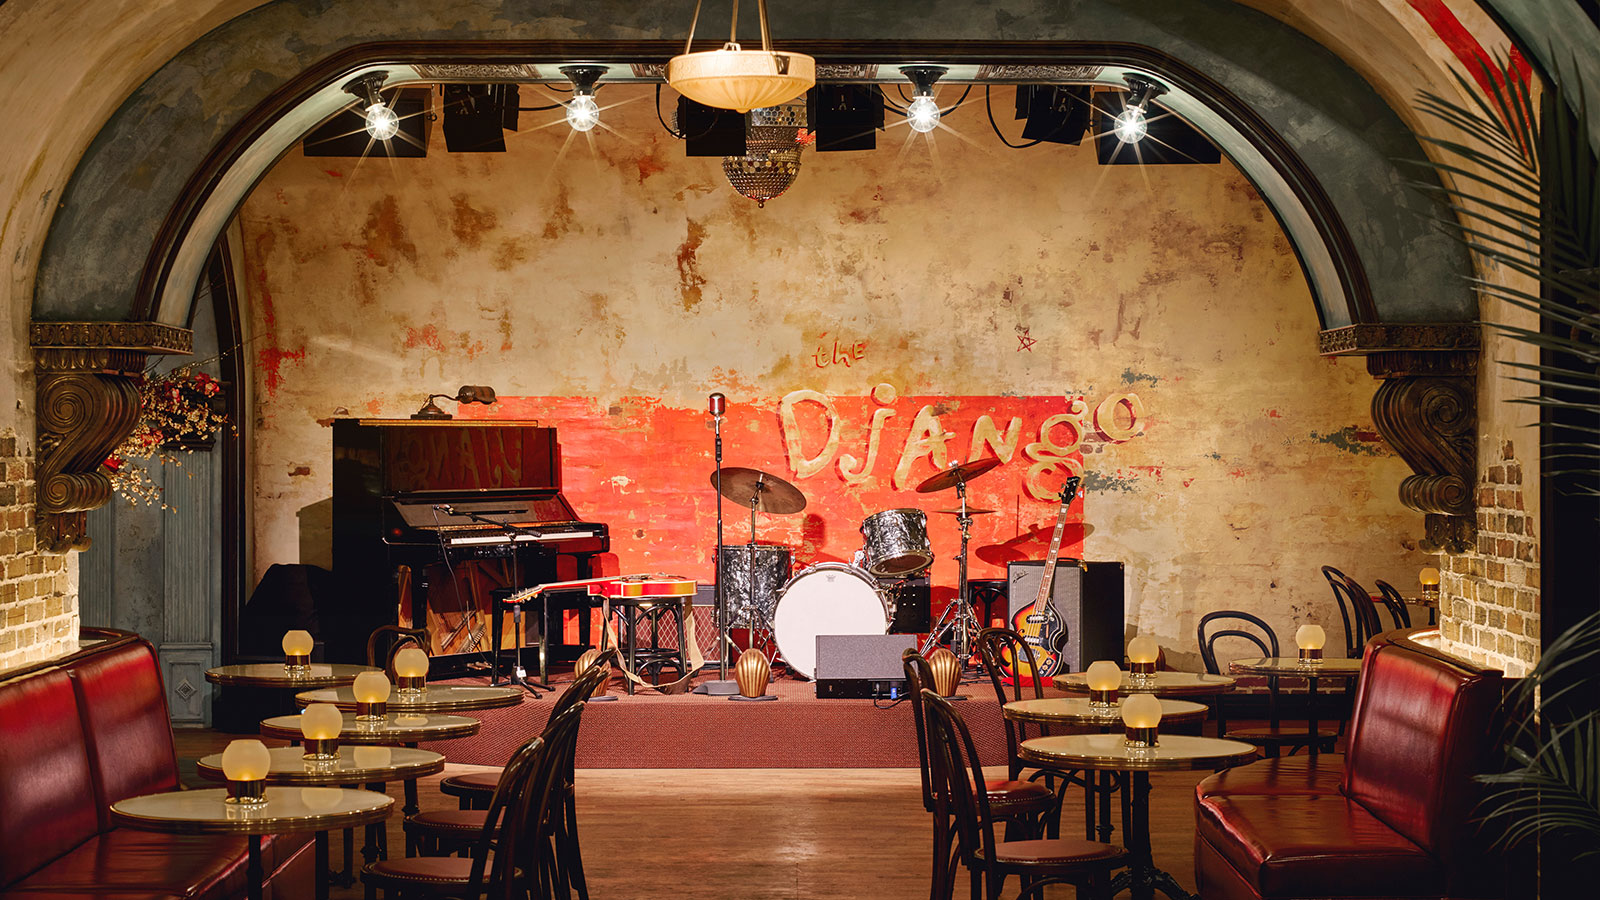 the django stage with all its instruments including a piano, a drum set and a guitar. There are candlelit tables lining the room